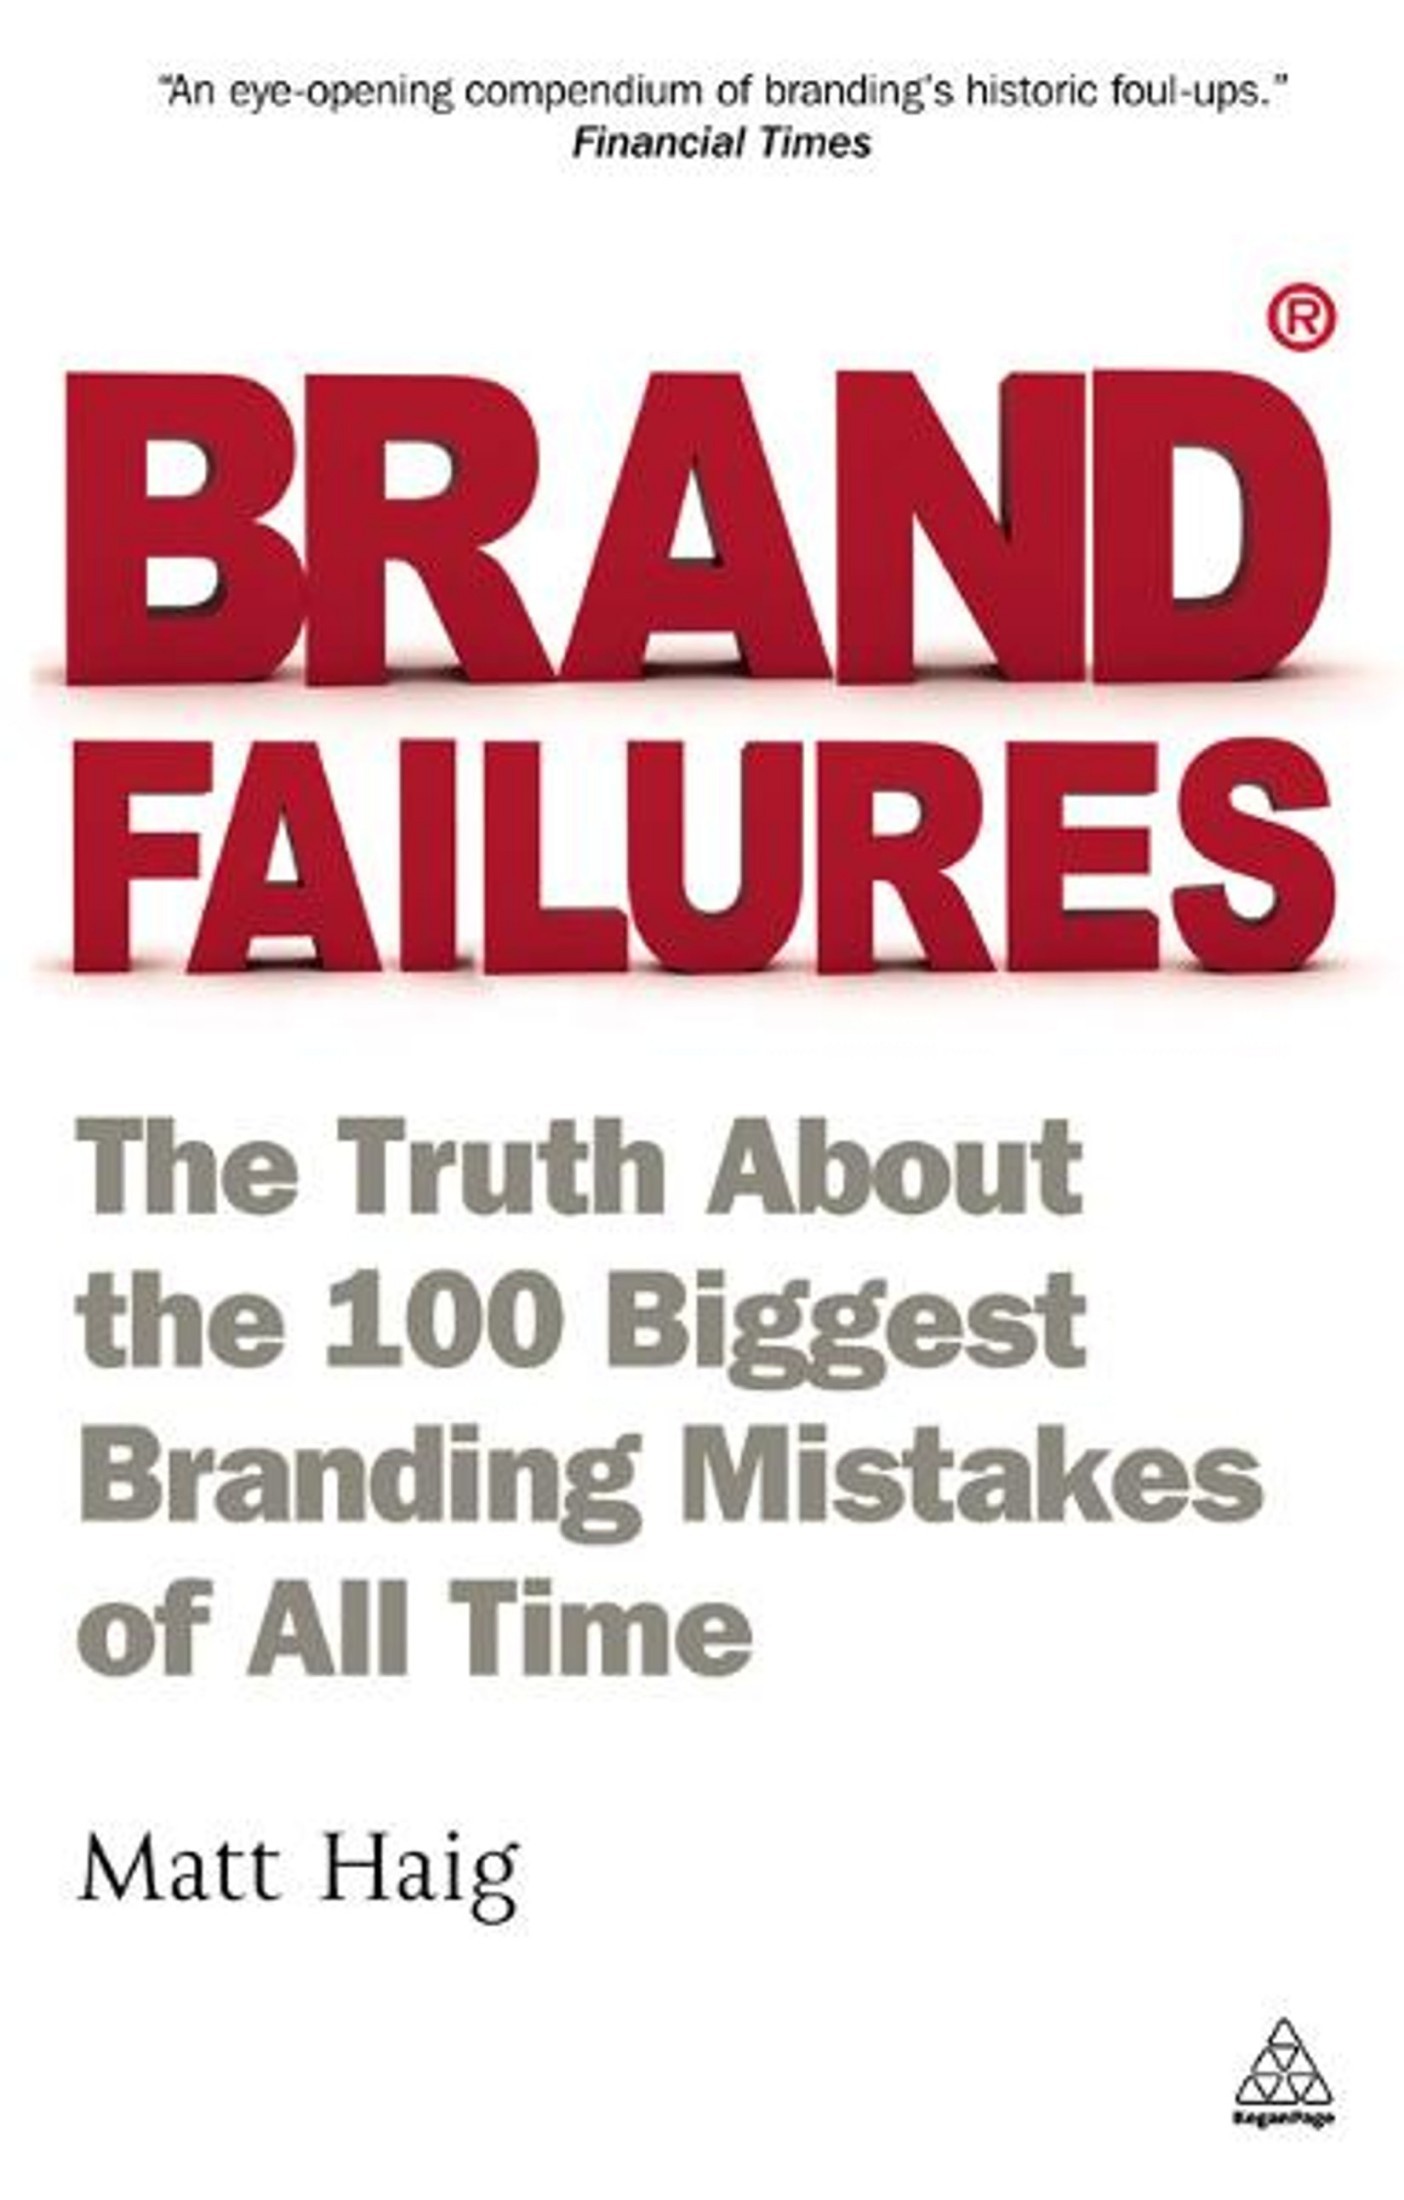 Brand Failures: The Truth About the 100 Biggest Branding Mistakes of All Time